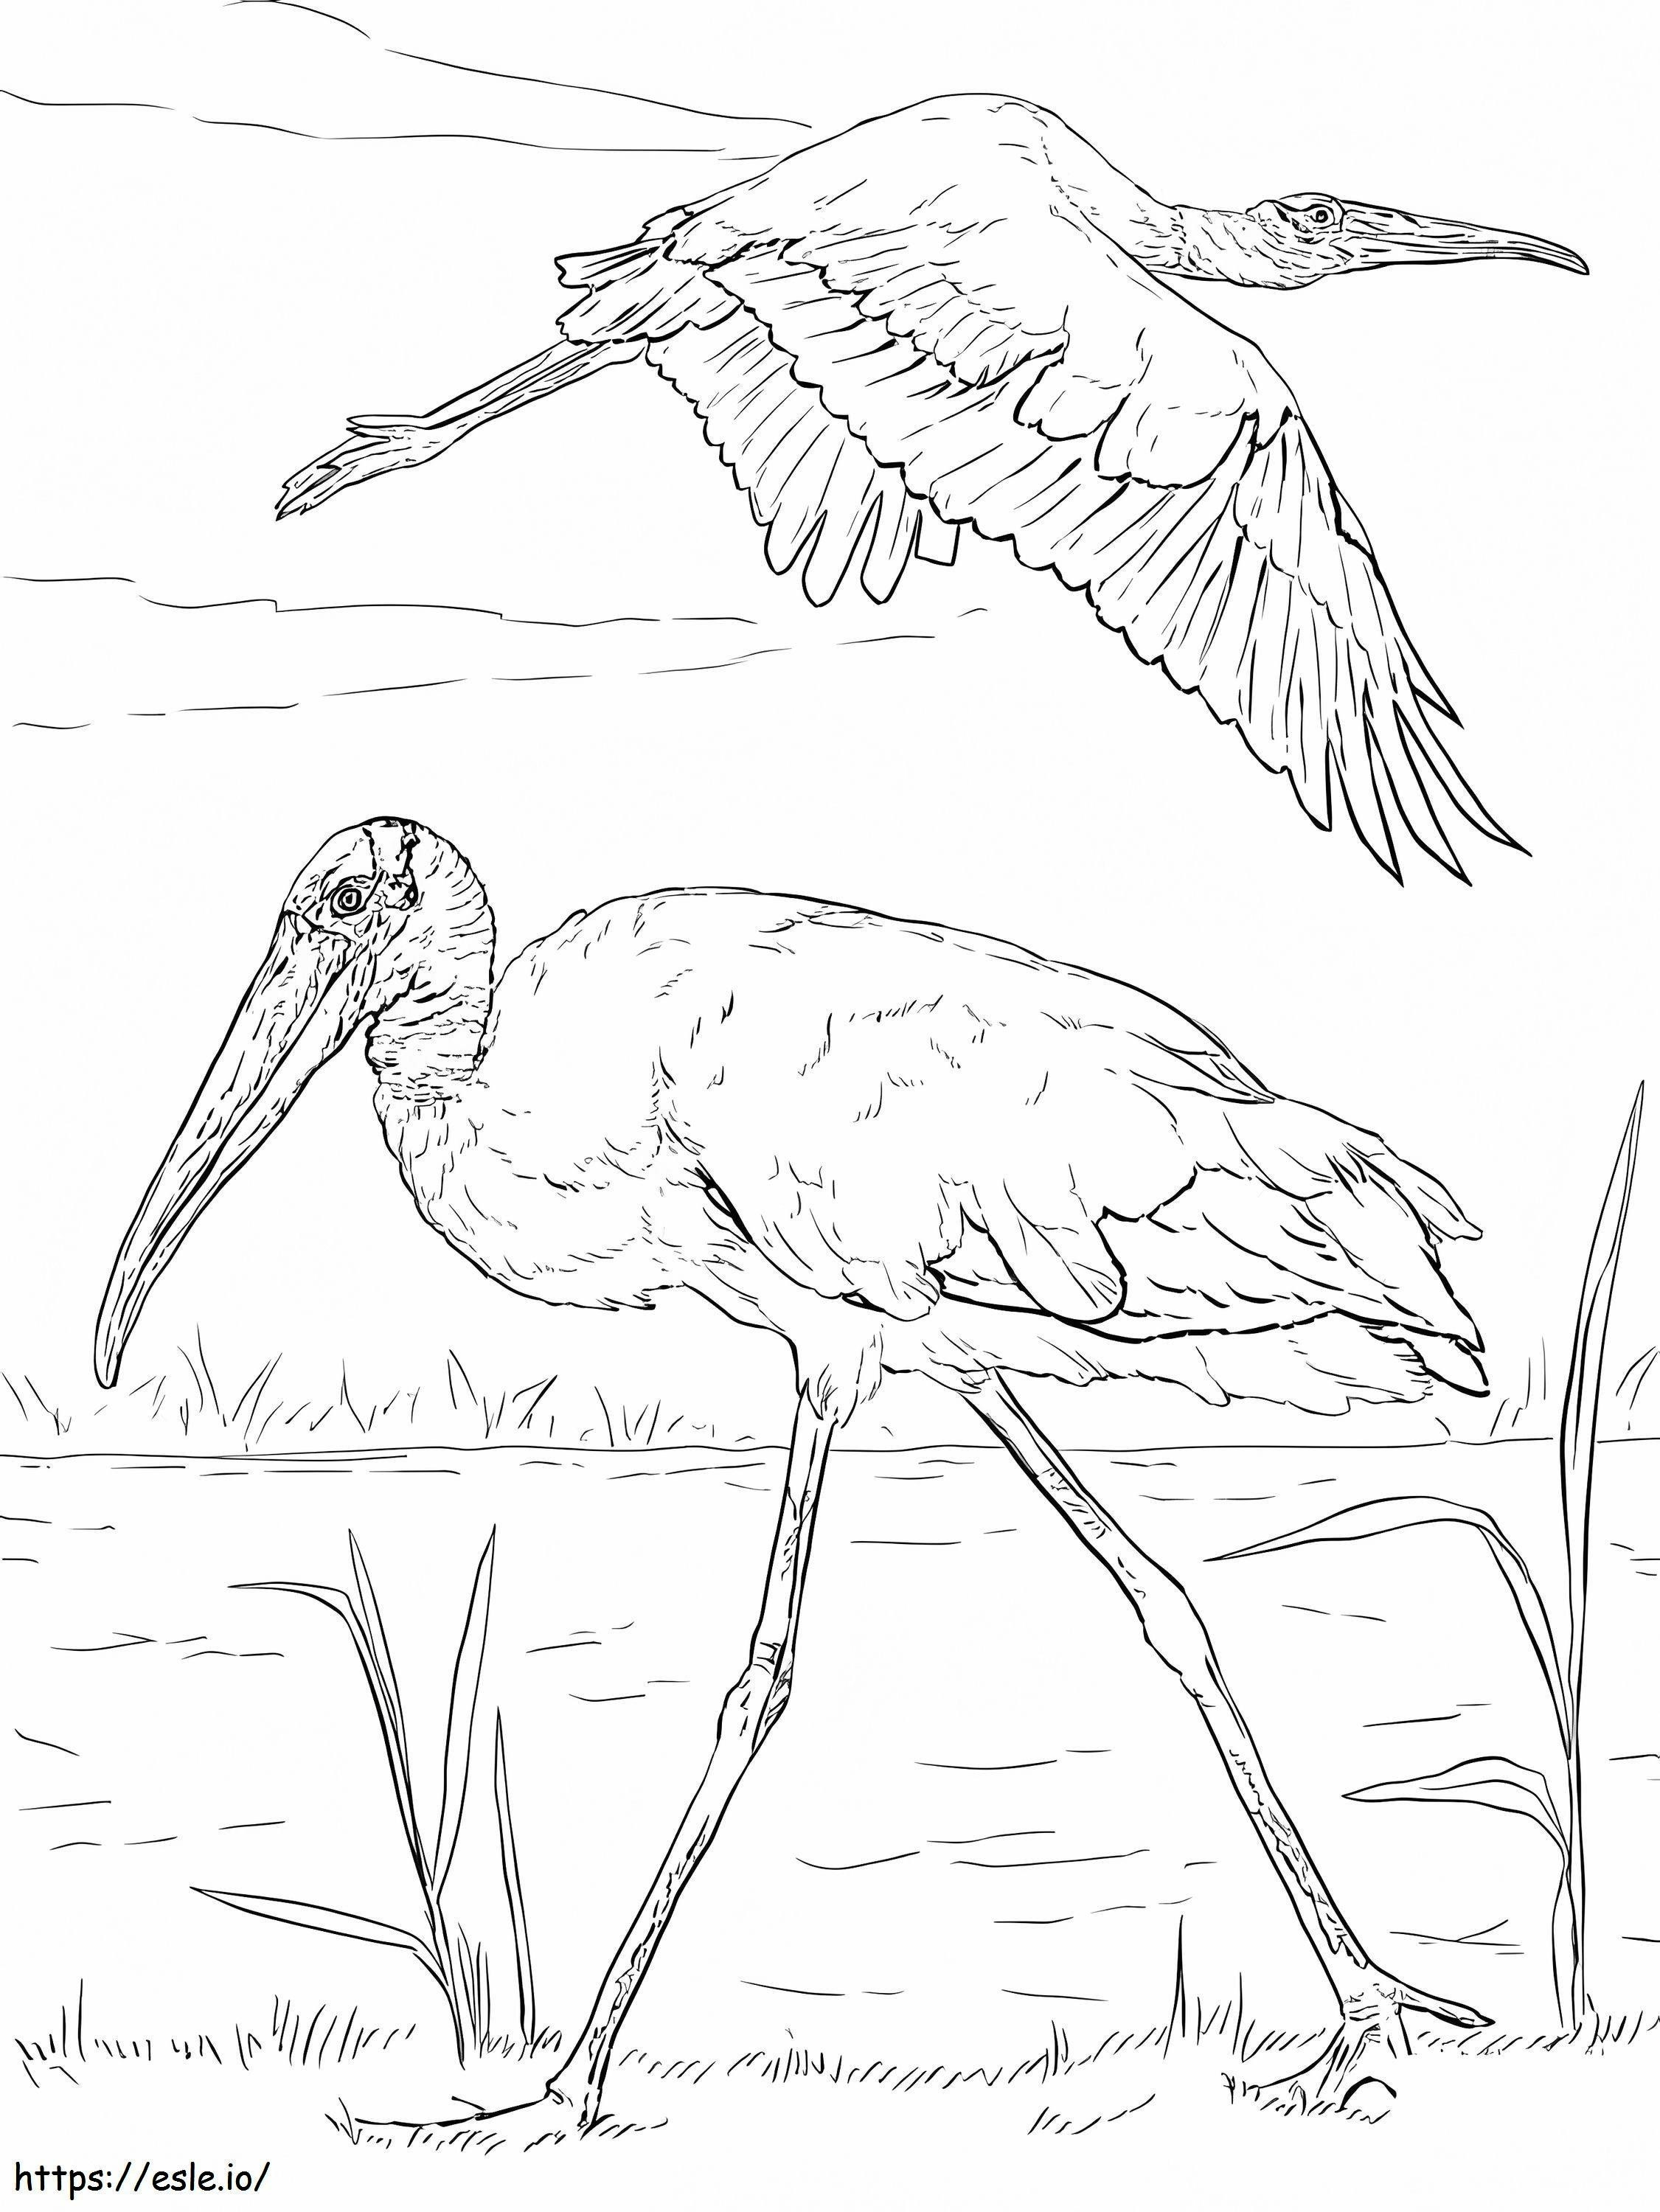 Wood Storks coloring page